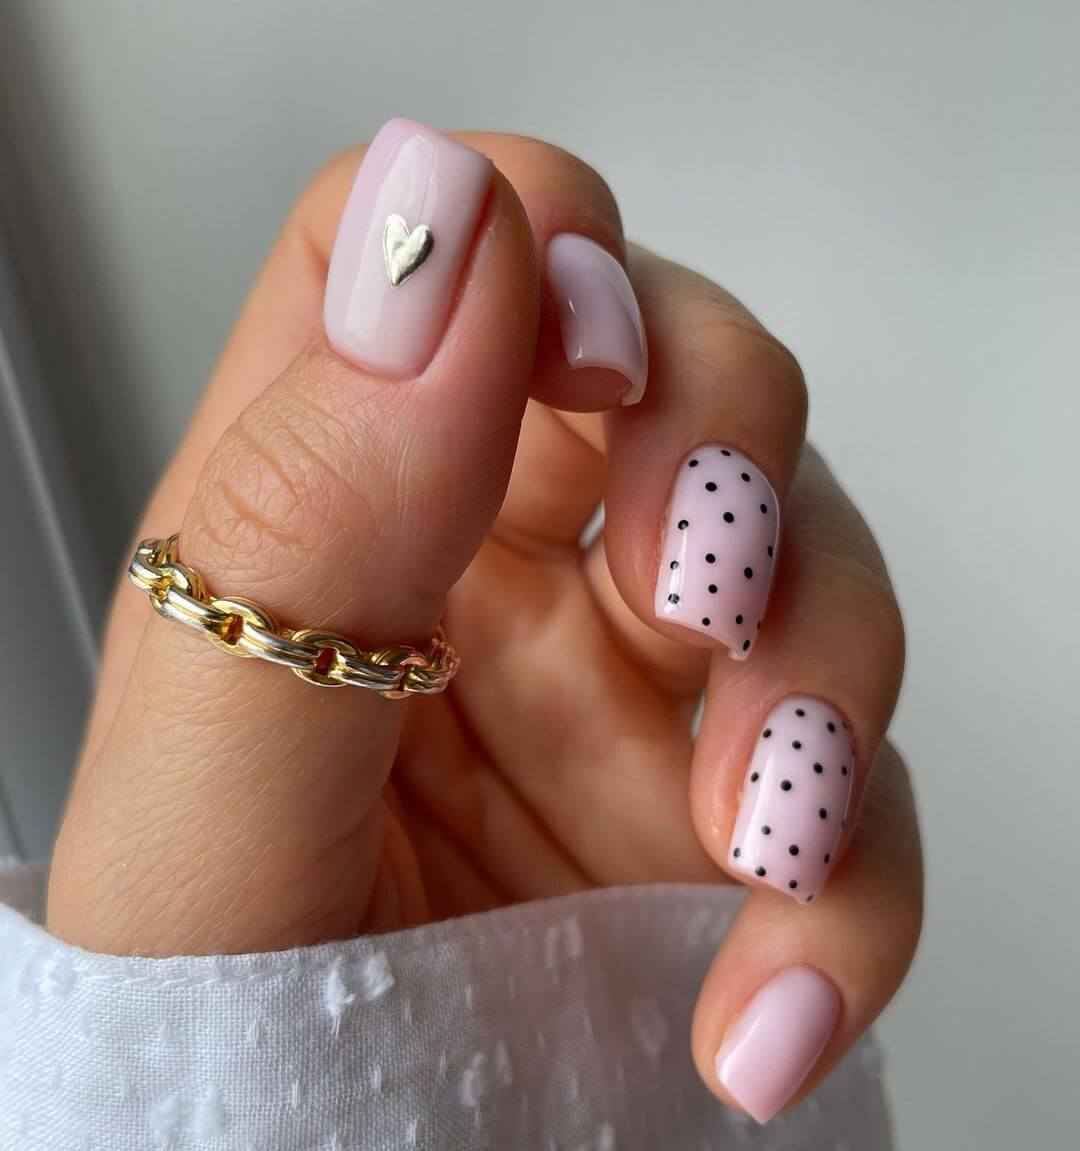 Heart Nail Art Designs for Valentine's Day-  Lavendar as the trend says!